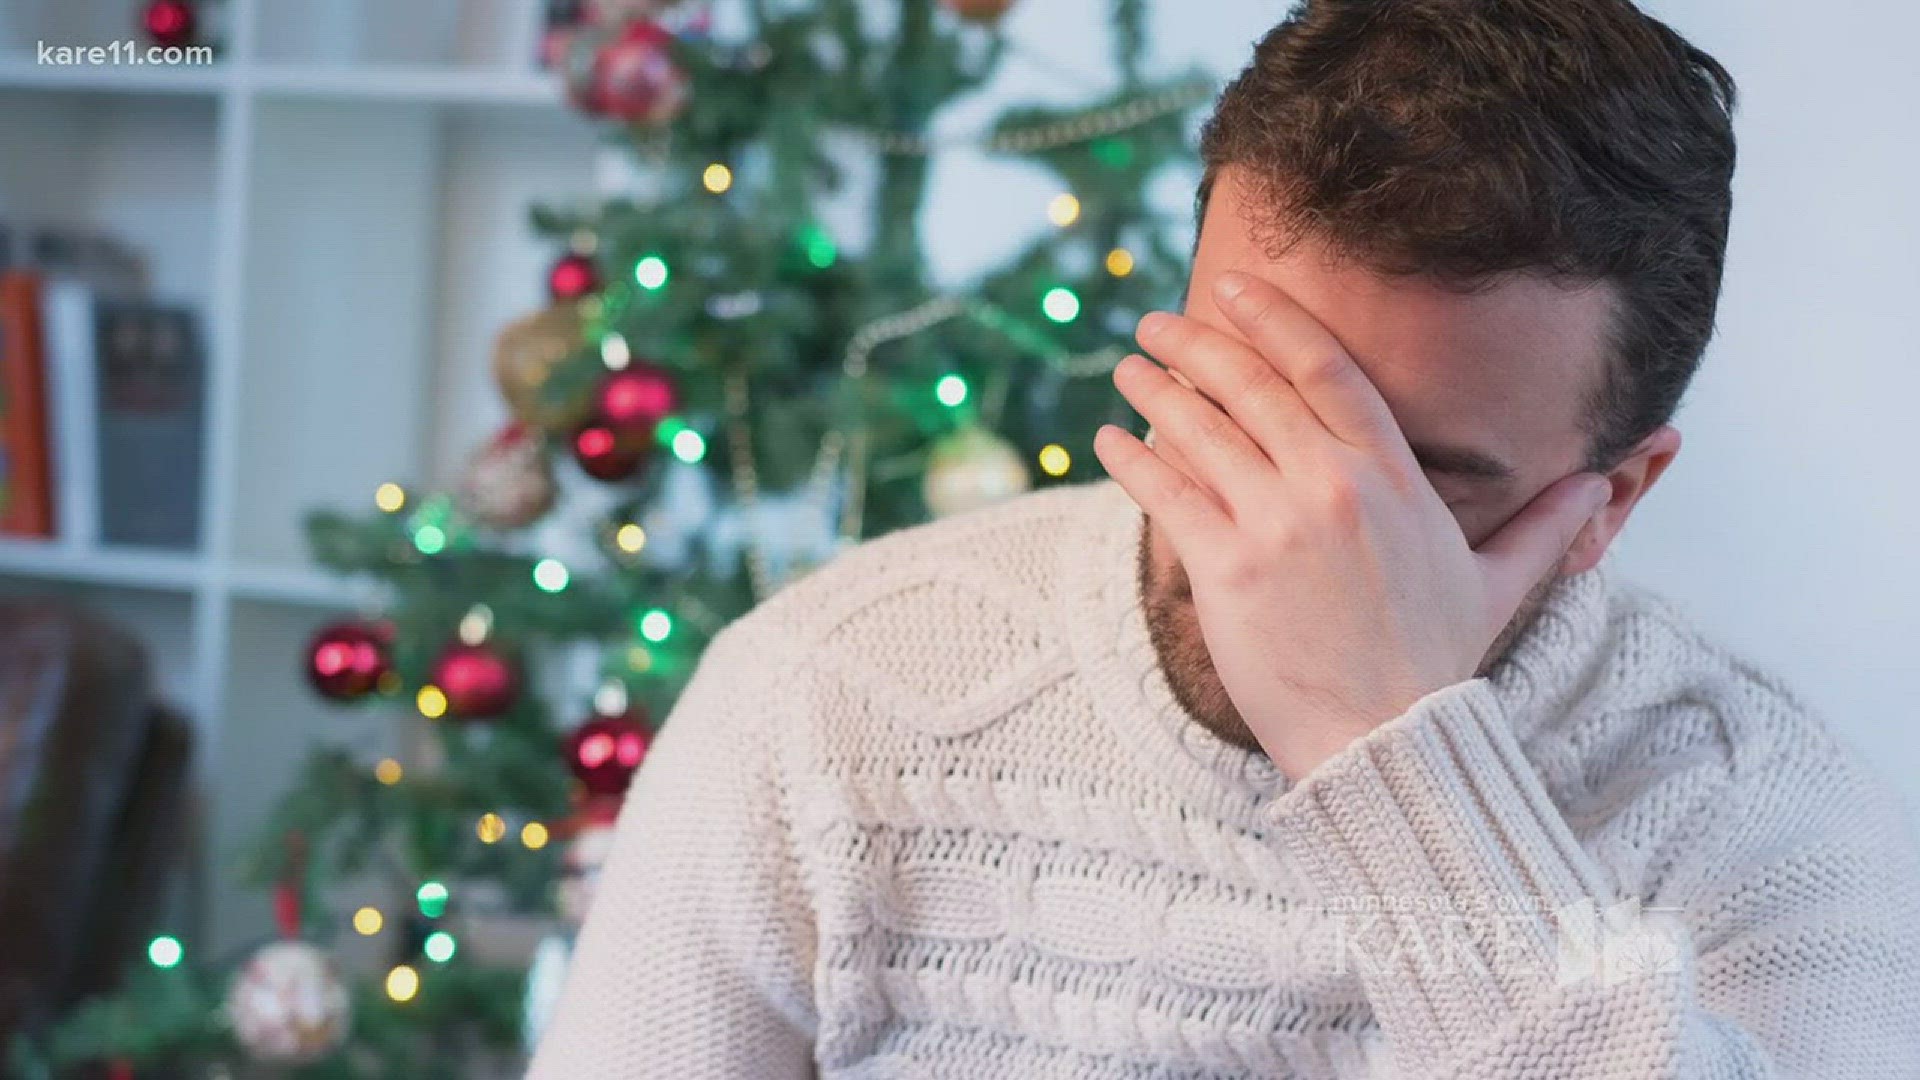 The holidays can be a trigger for men (and women) suffering with depression. Park Nicollet psychotherapist Emily Bulthuis has some suggestions.